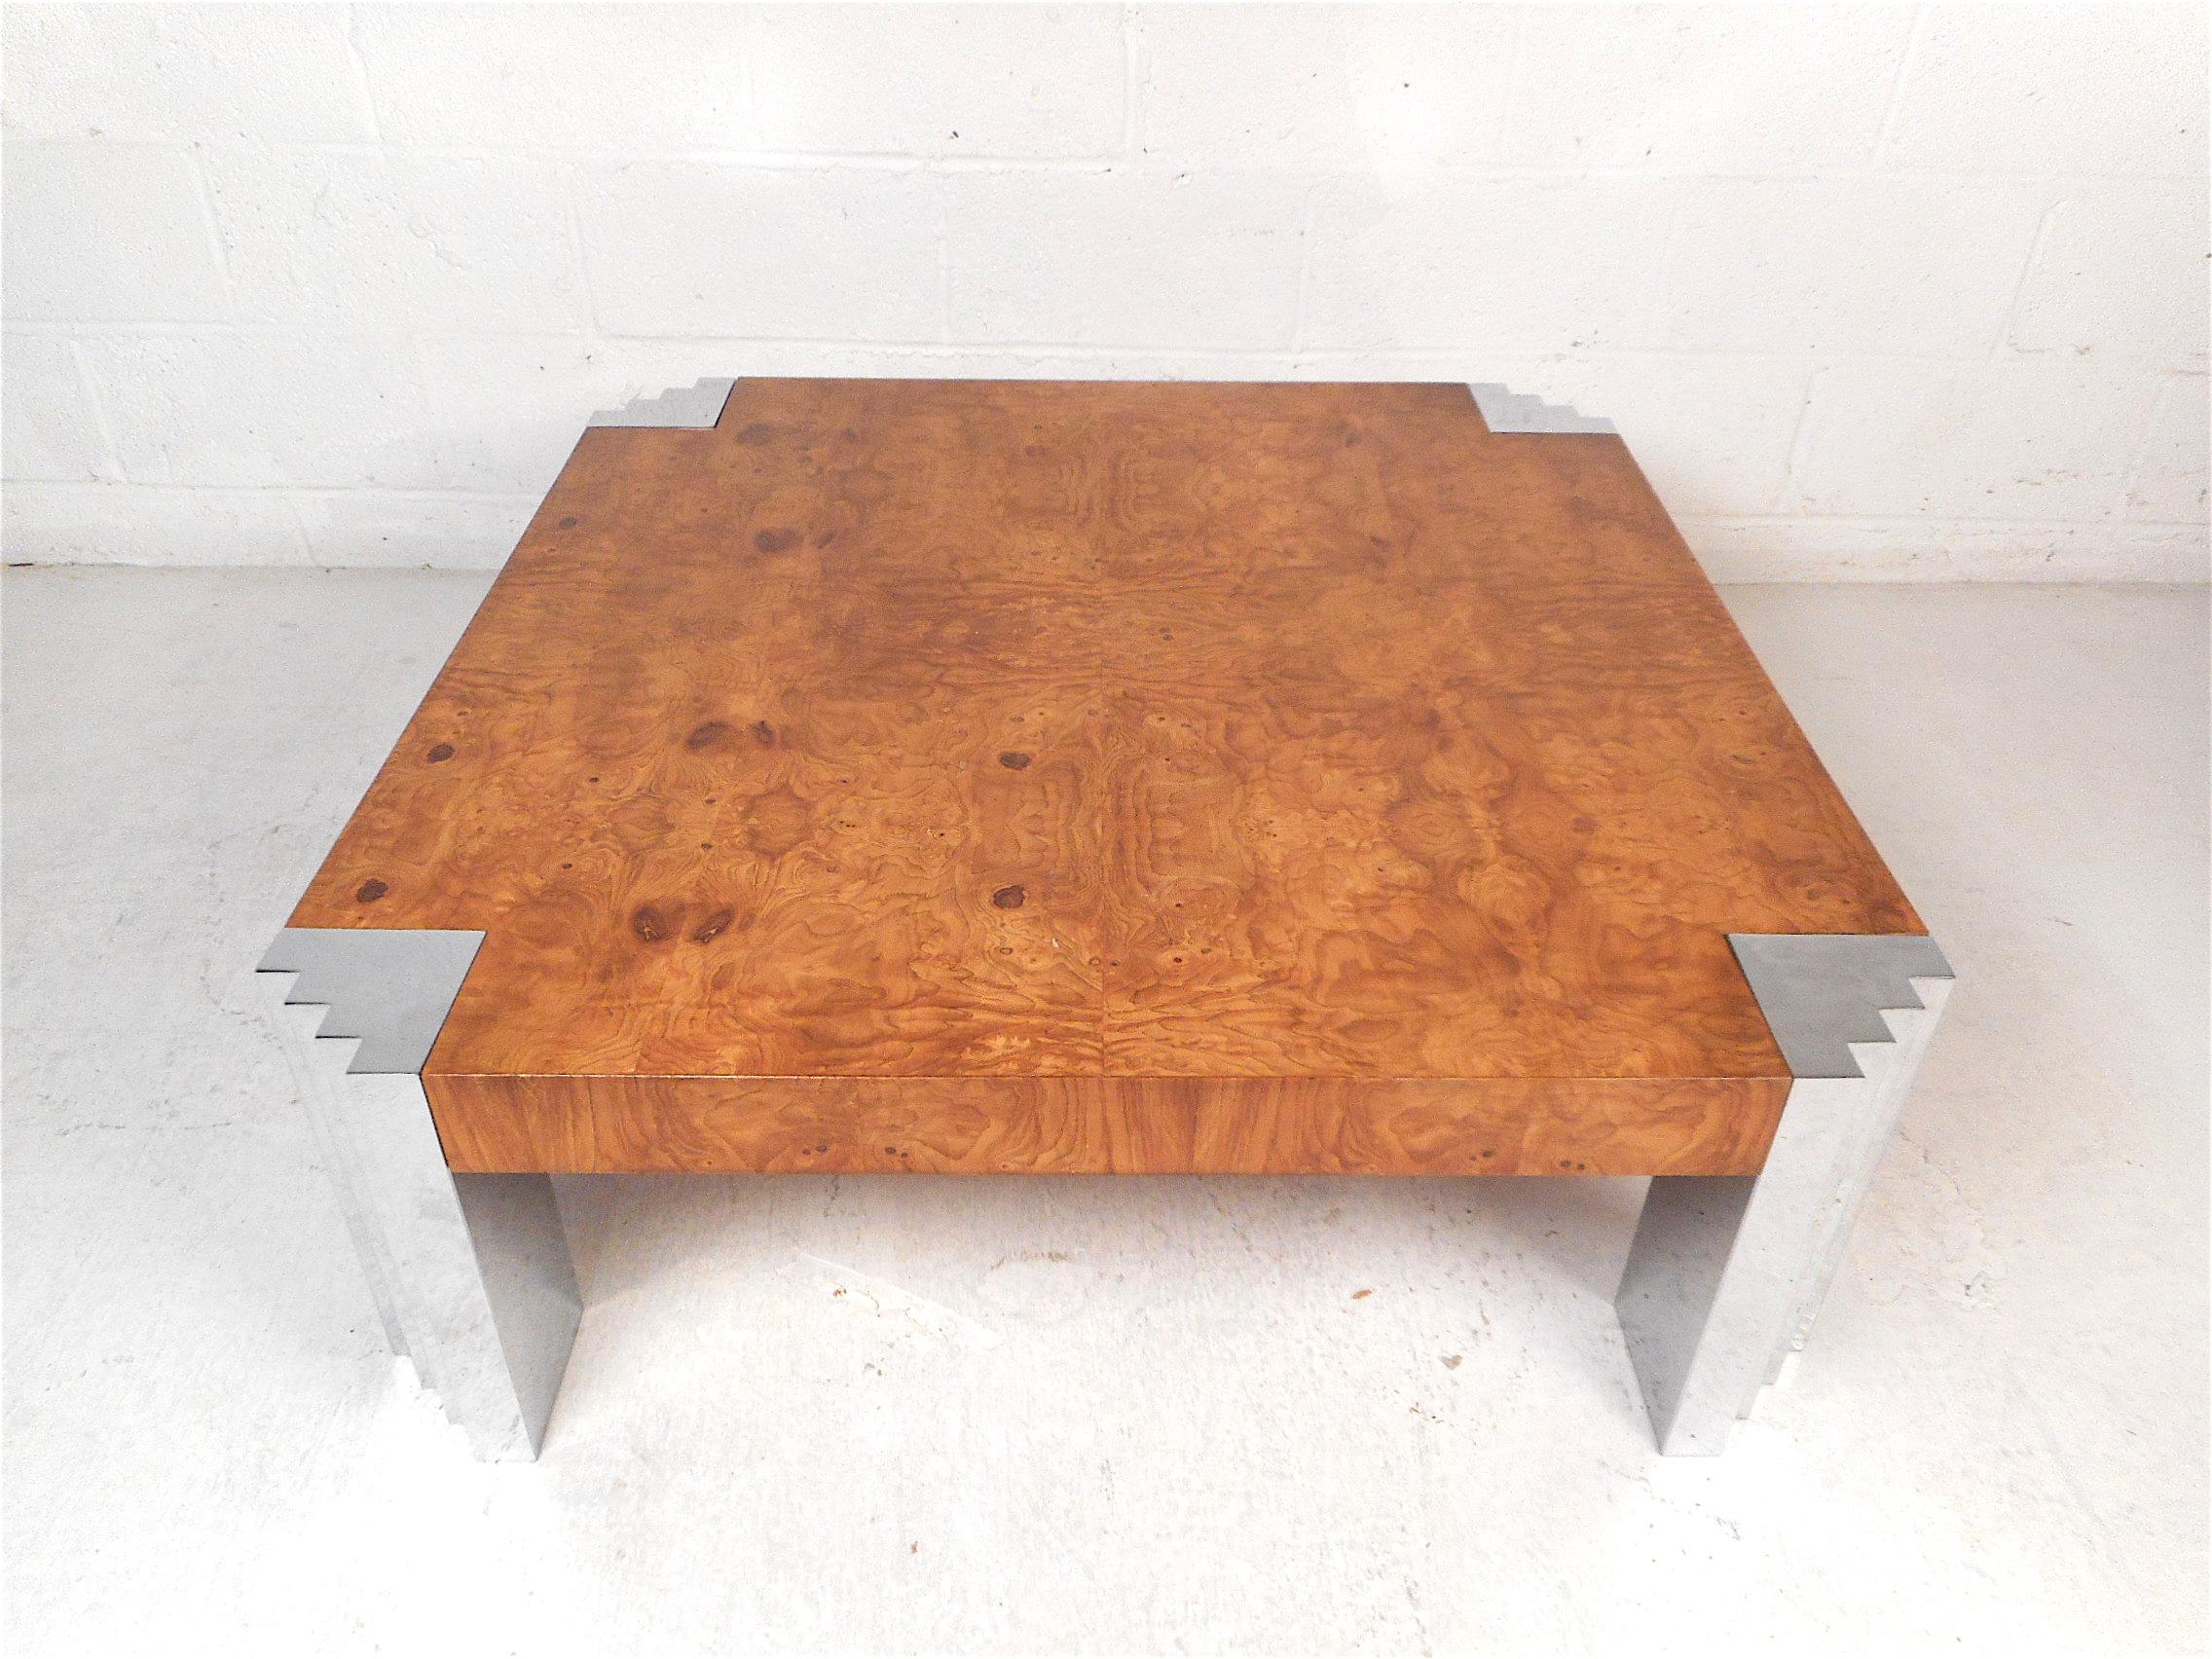 Stunning midcentury coffee/cocktail table with a burl maple tabletop, along with chrome supports on each corner of the table. Great table styled after Milo Baughman. Sure to make an impression in any modern interior. Please confirm item location